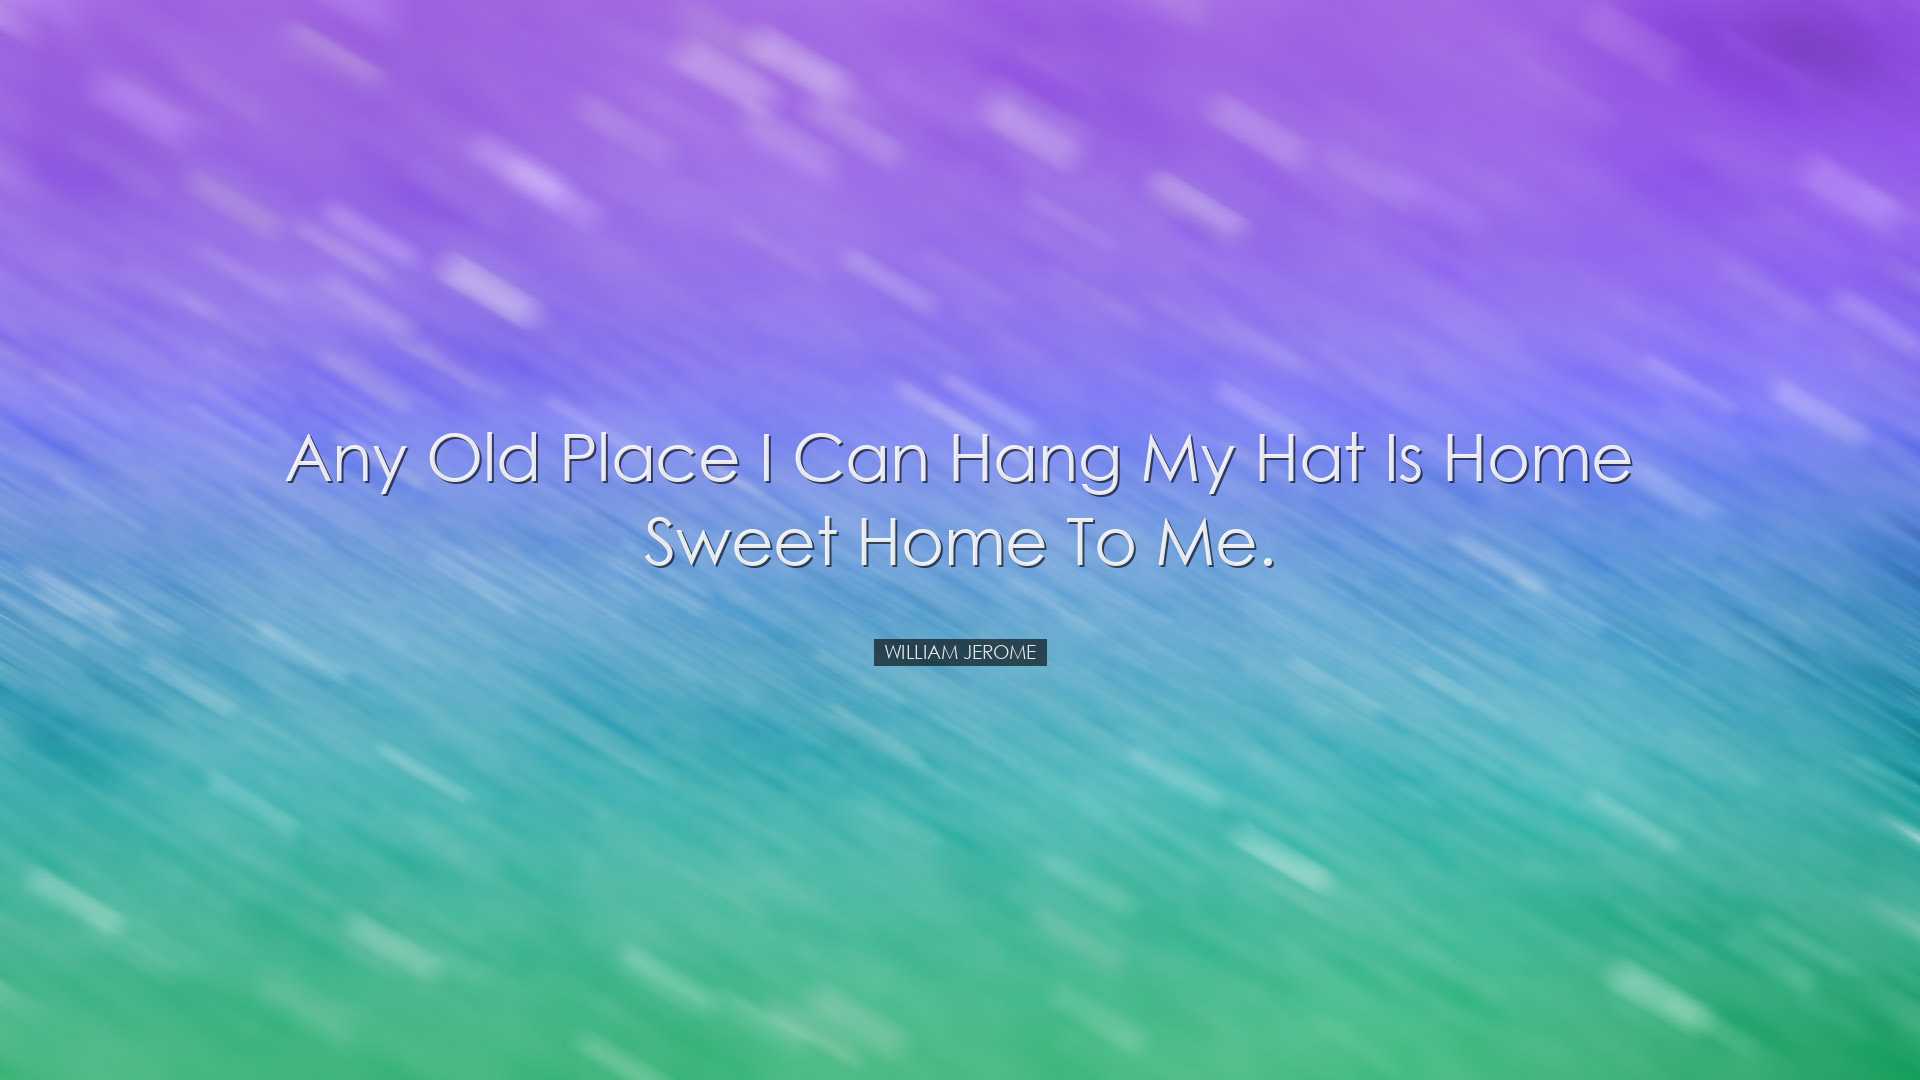 Any old place I can hang my hat is home sweet home to me. - Willia